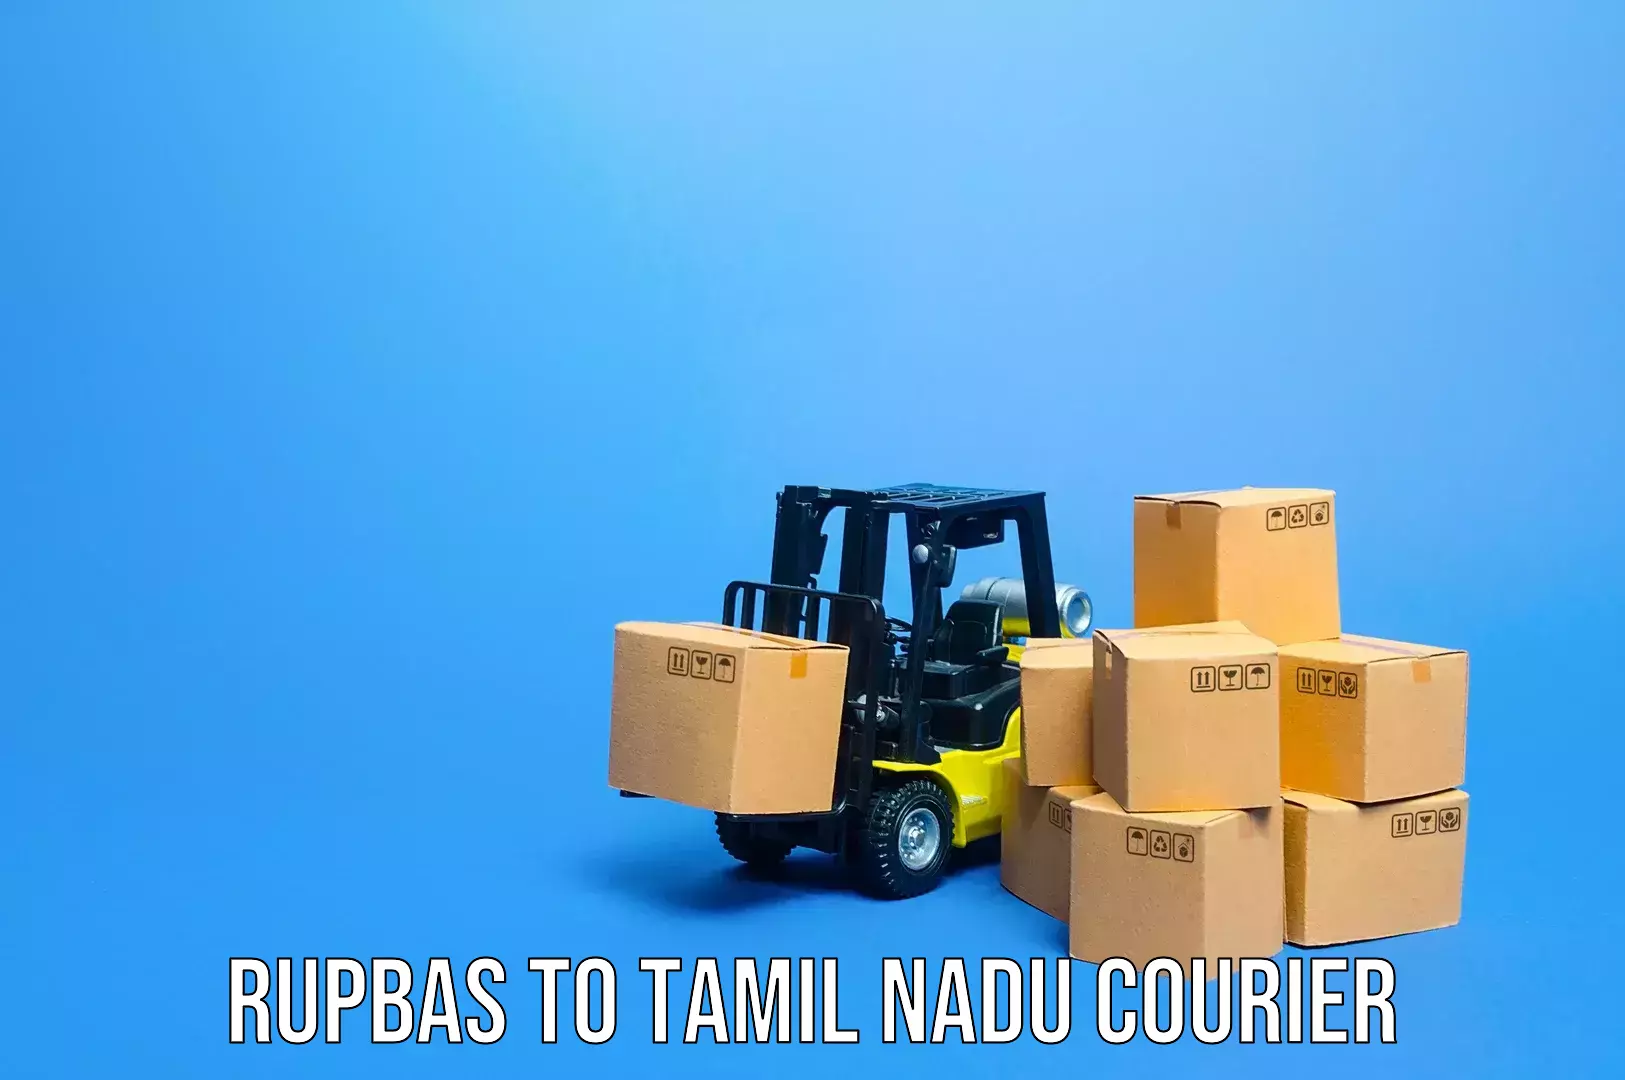 Suburban luggage delivery in Rupbas to Tamil Nadu